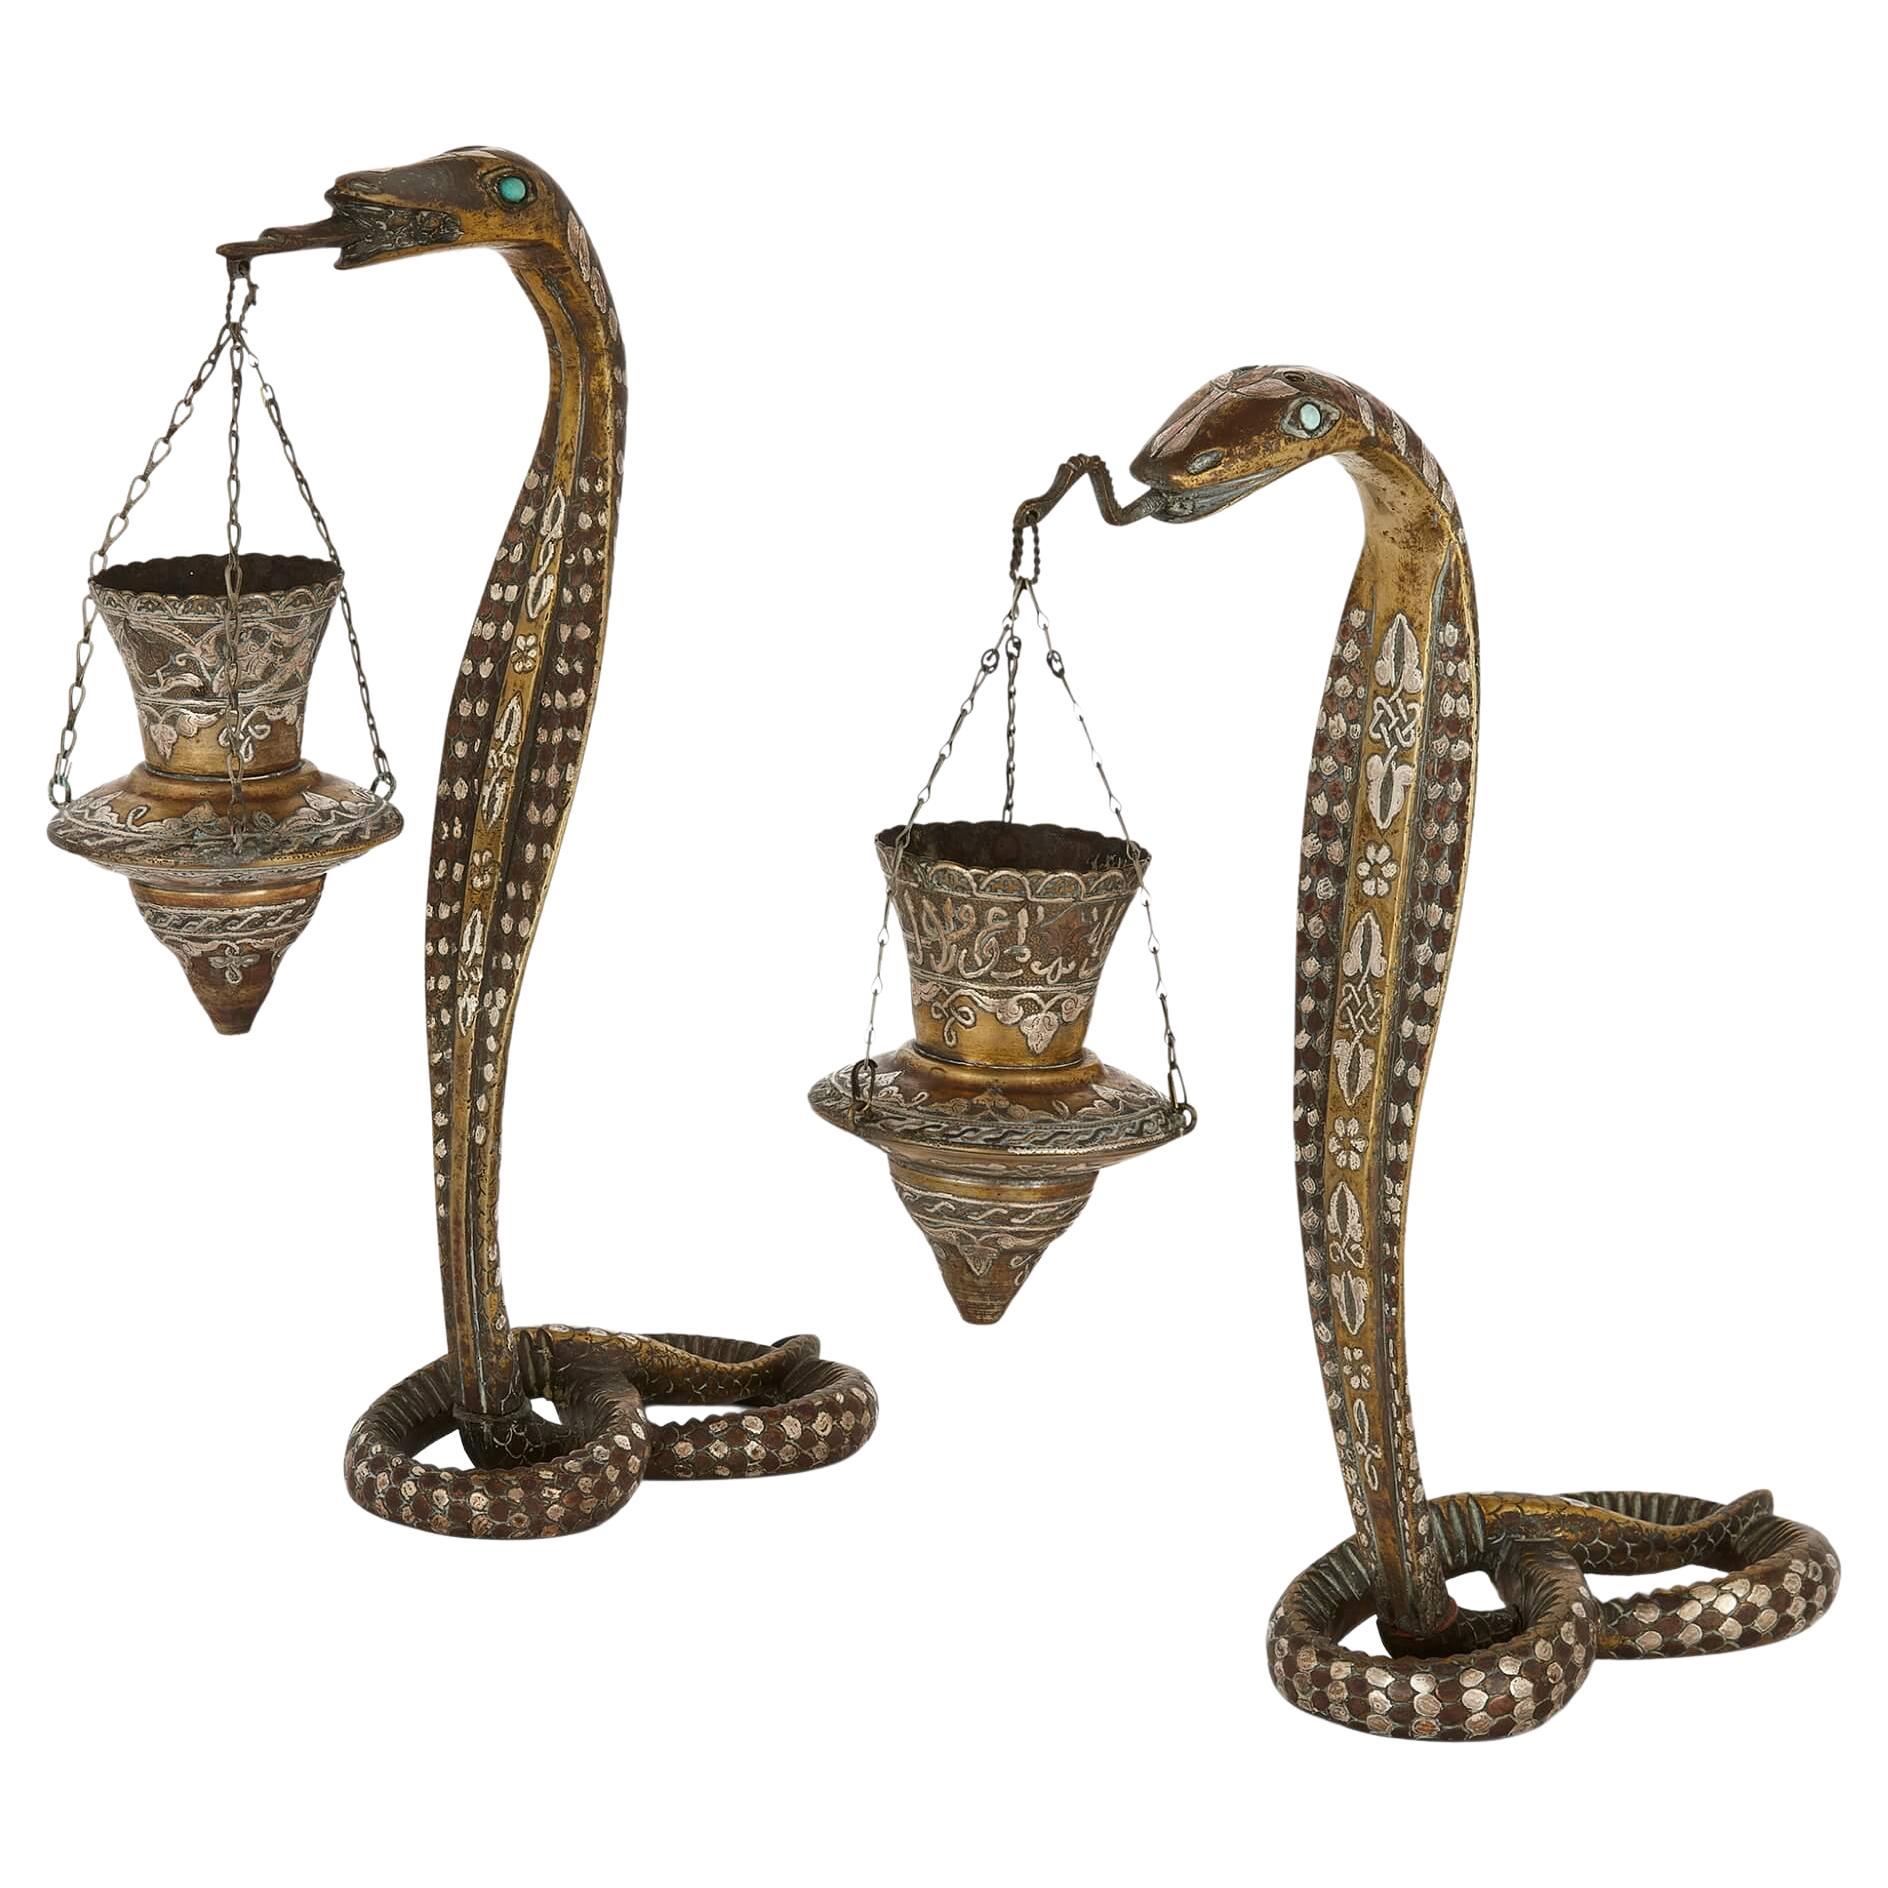 Pair of Silver-Inlaid Brass Art Deco Serpent Candle Holders